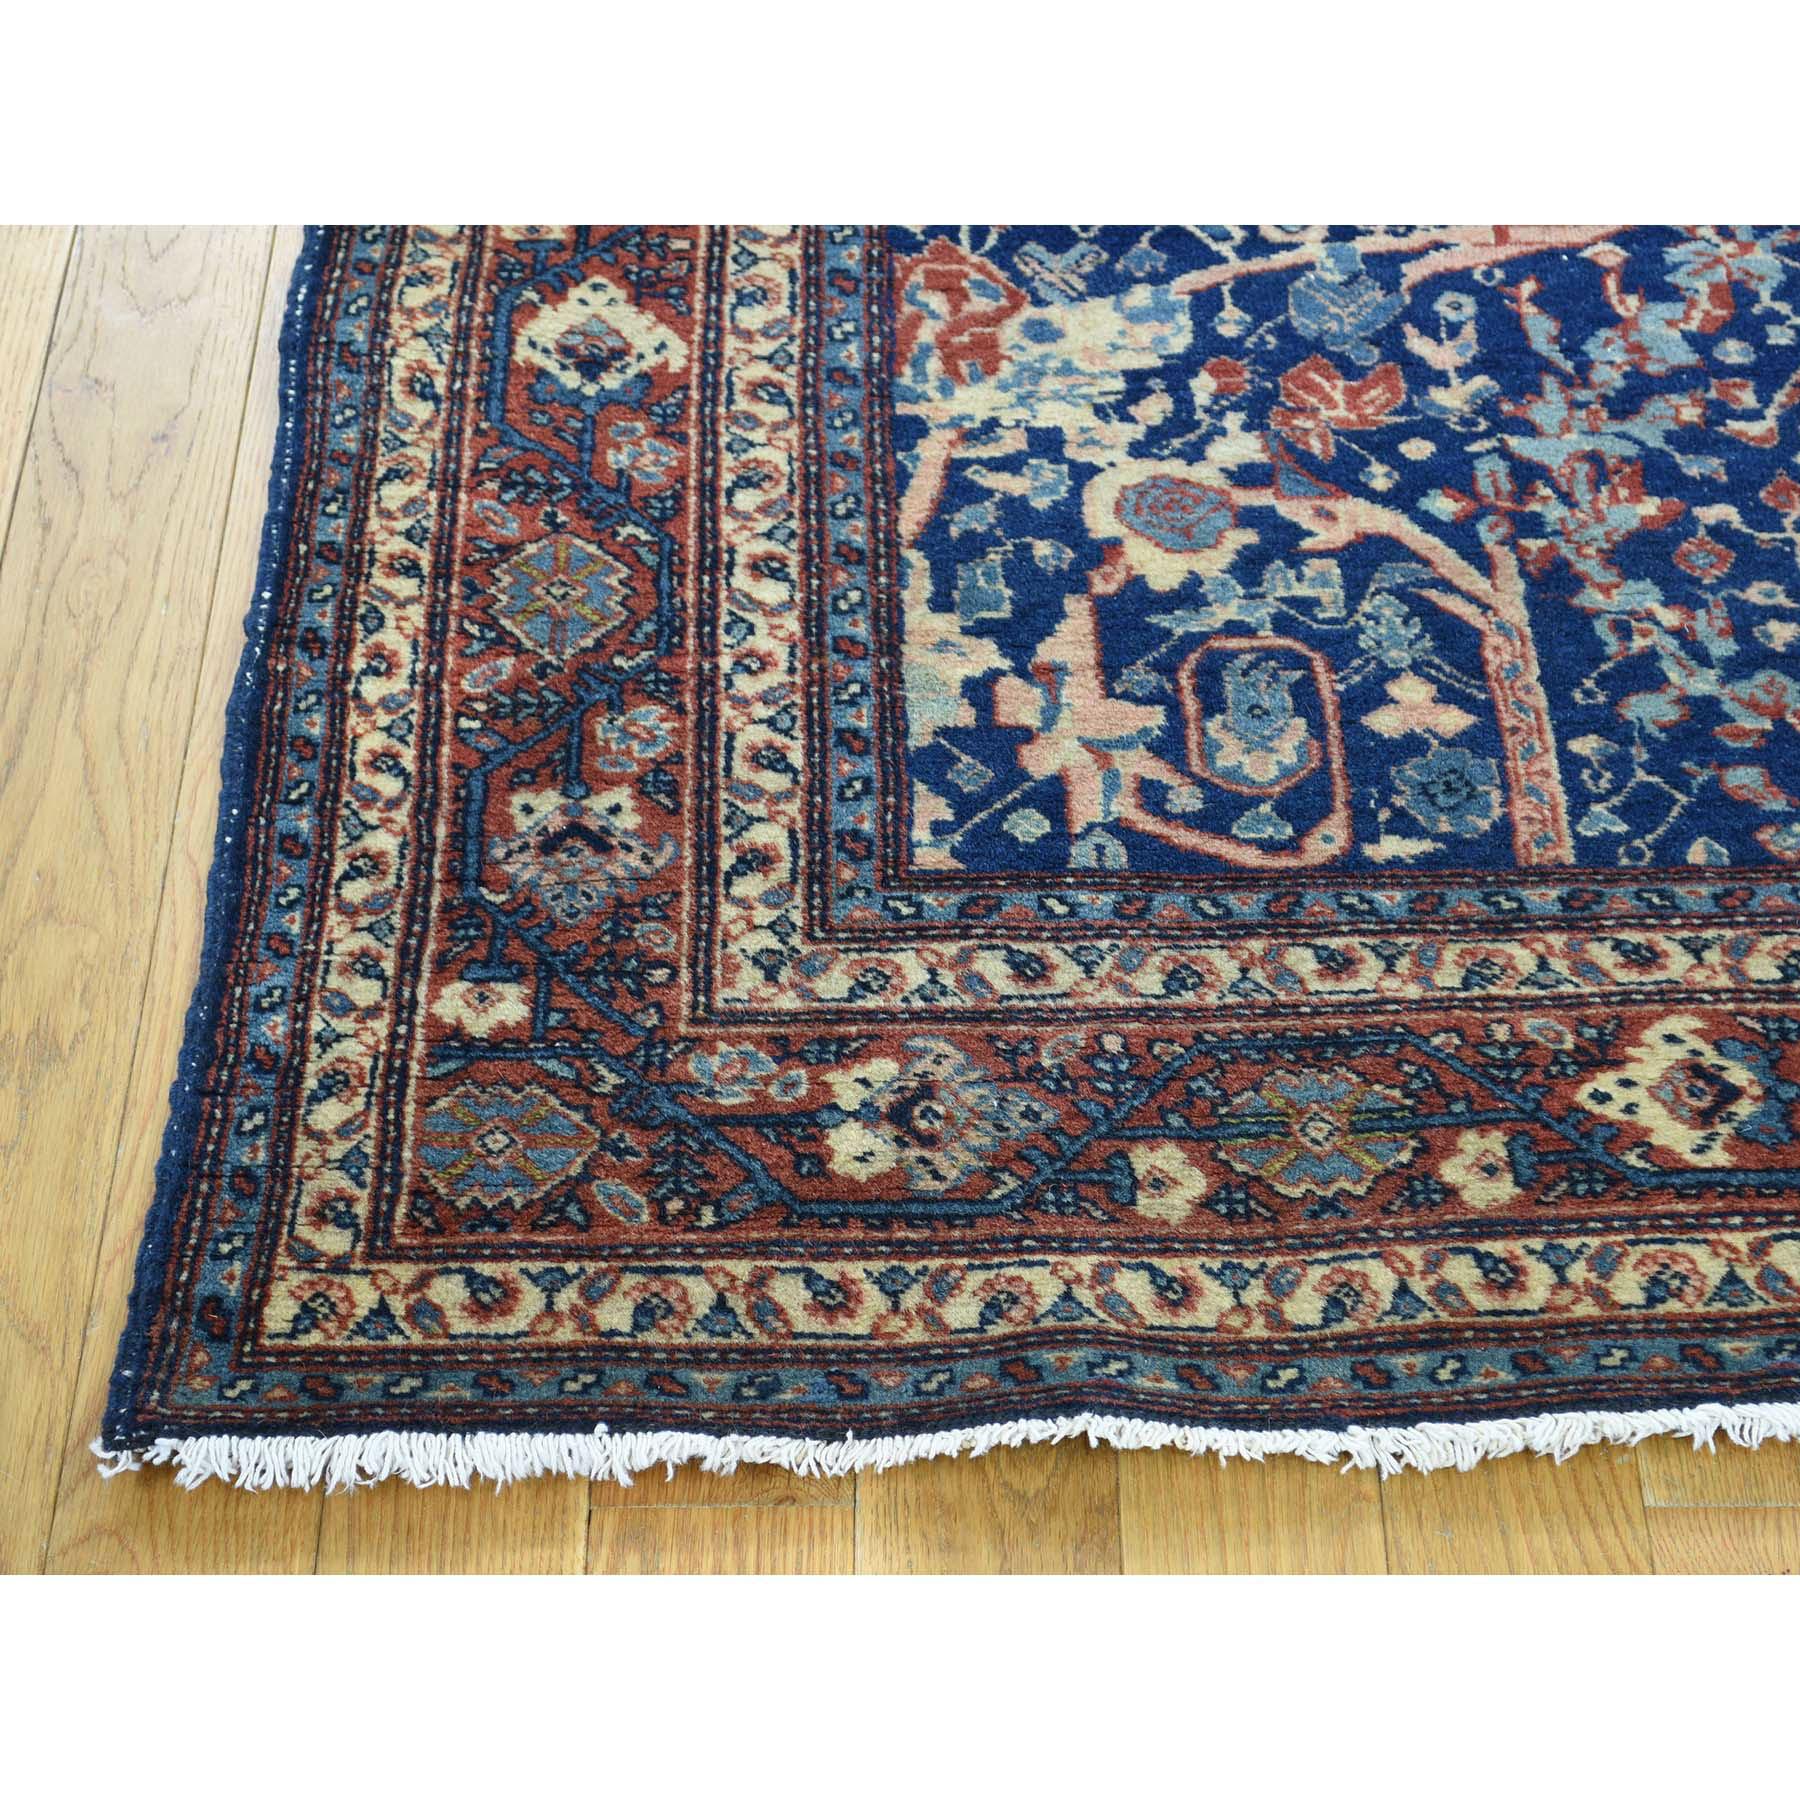 This is a truly genuine one-of-a-kind hand-knotted antique Persian tabriz navy blue full pile rug. It has been Knotted for months and months in the centuries-old Persian weaving craftsmanship techniques by expert artisans.


Primary materials: